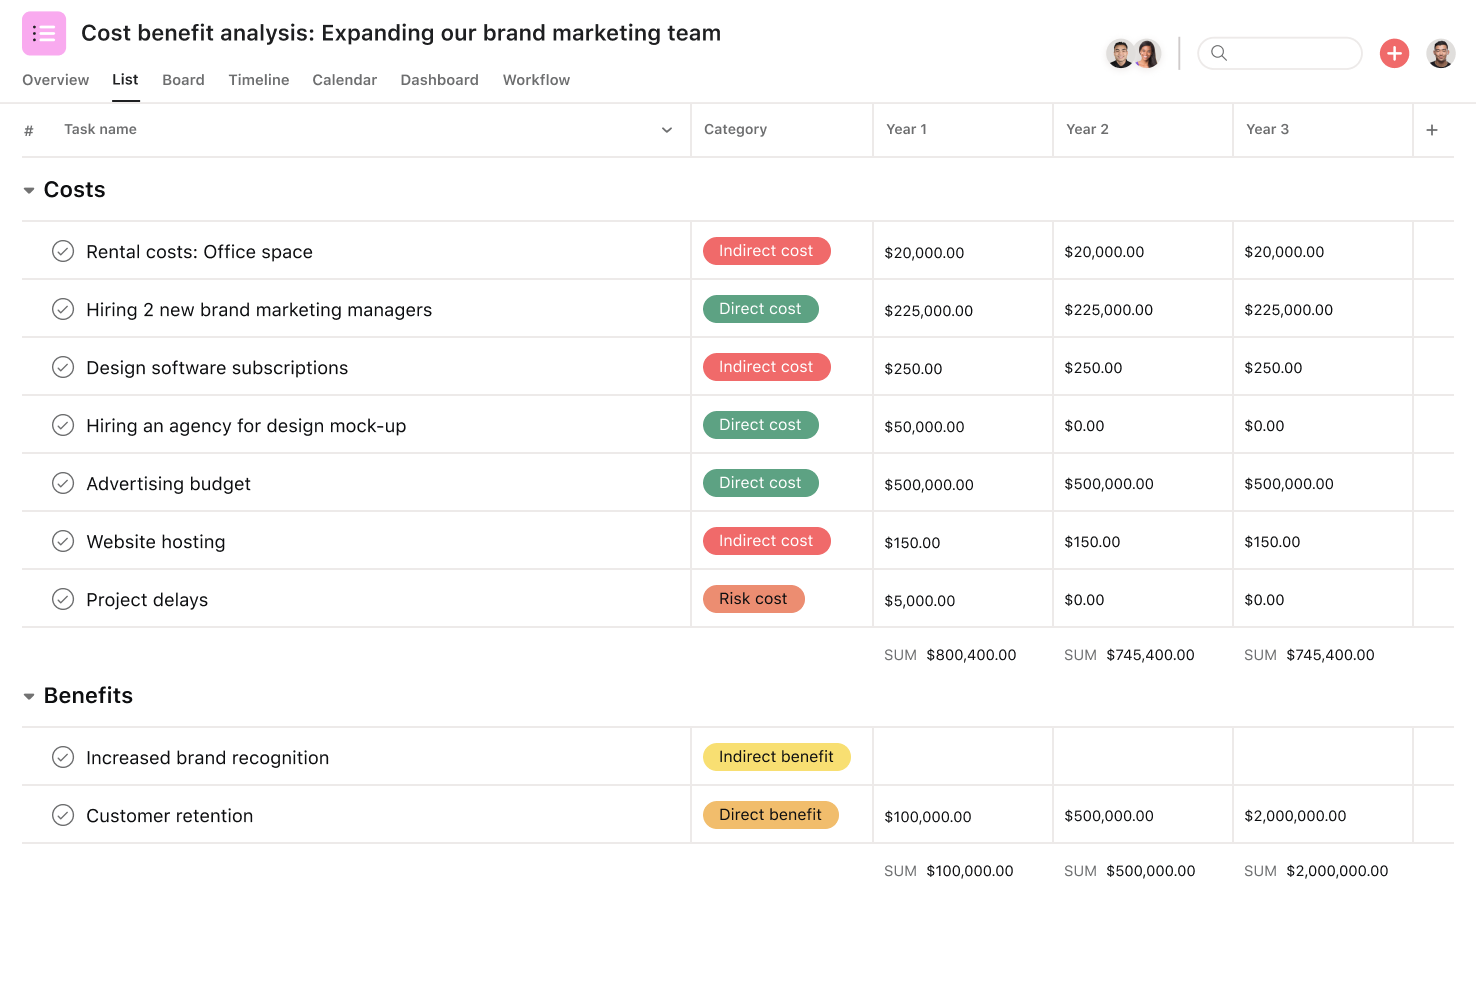 [Product ui] Cost benefit analysis project in Asana, spreadsheet-style project view (List)